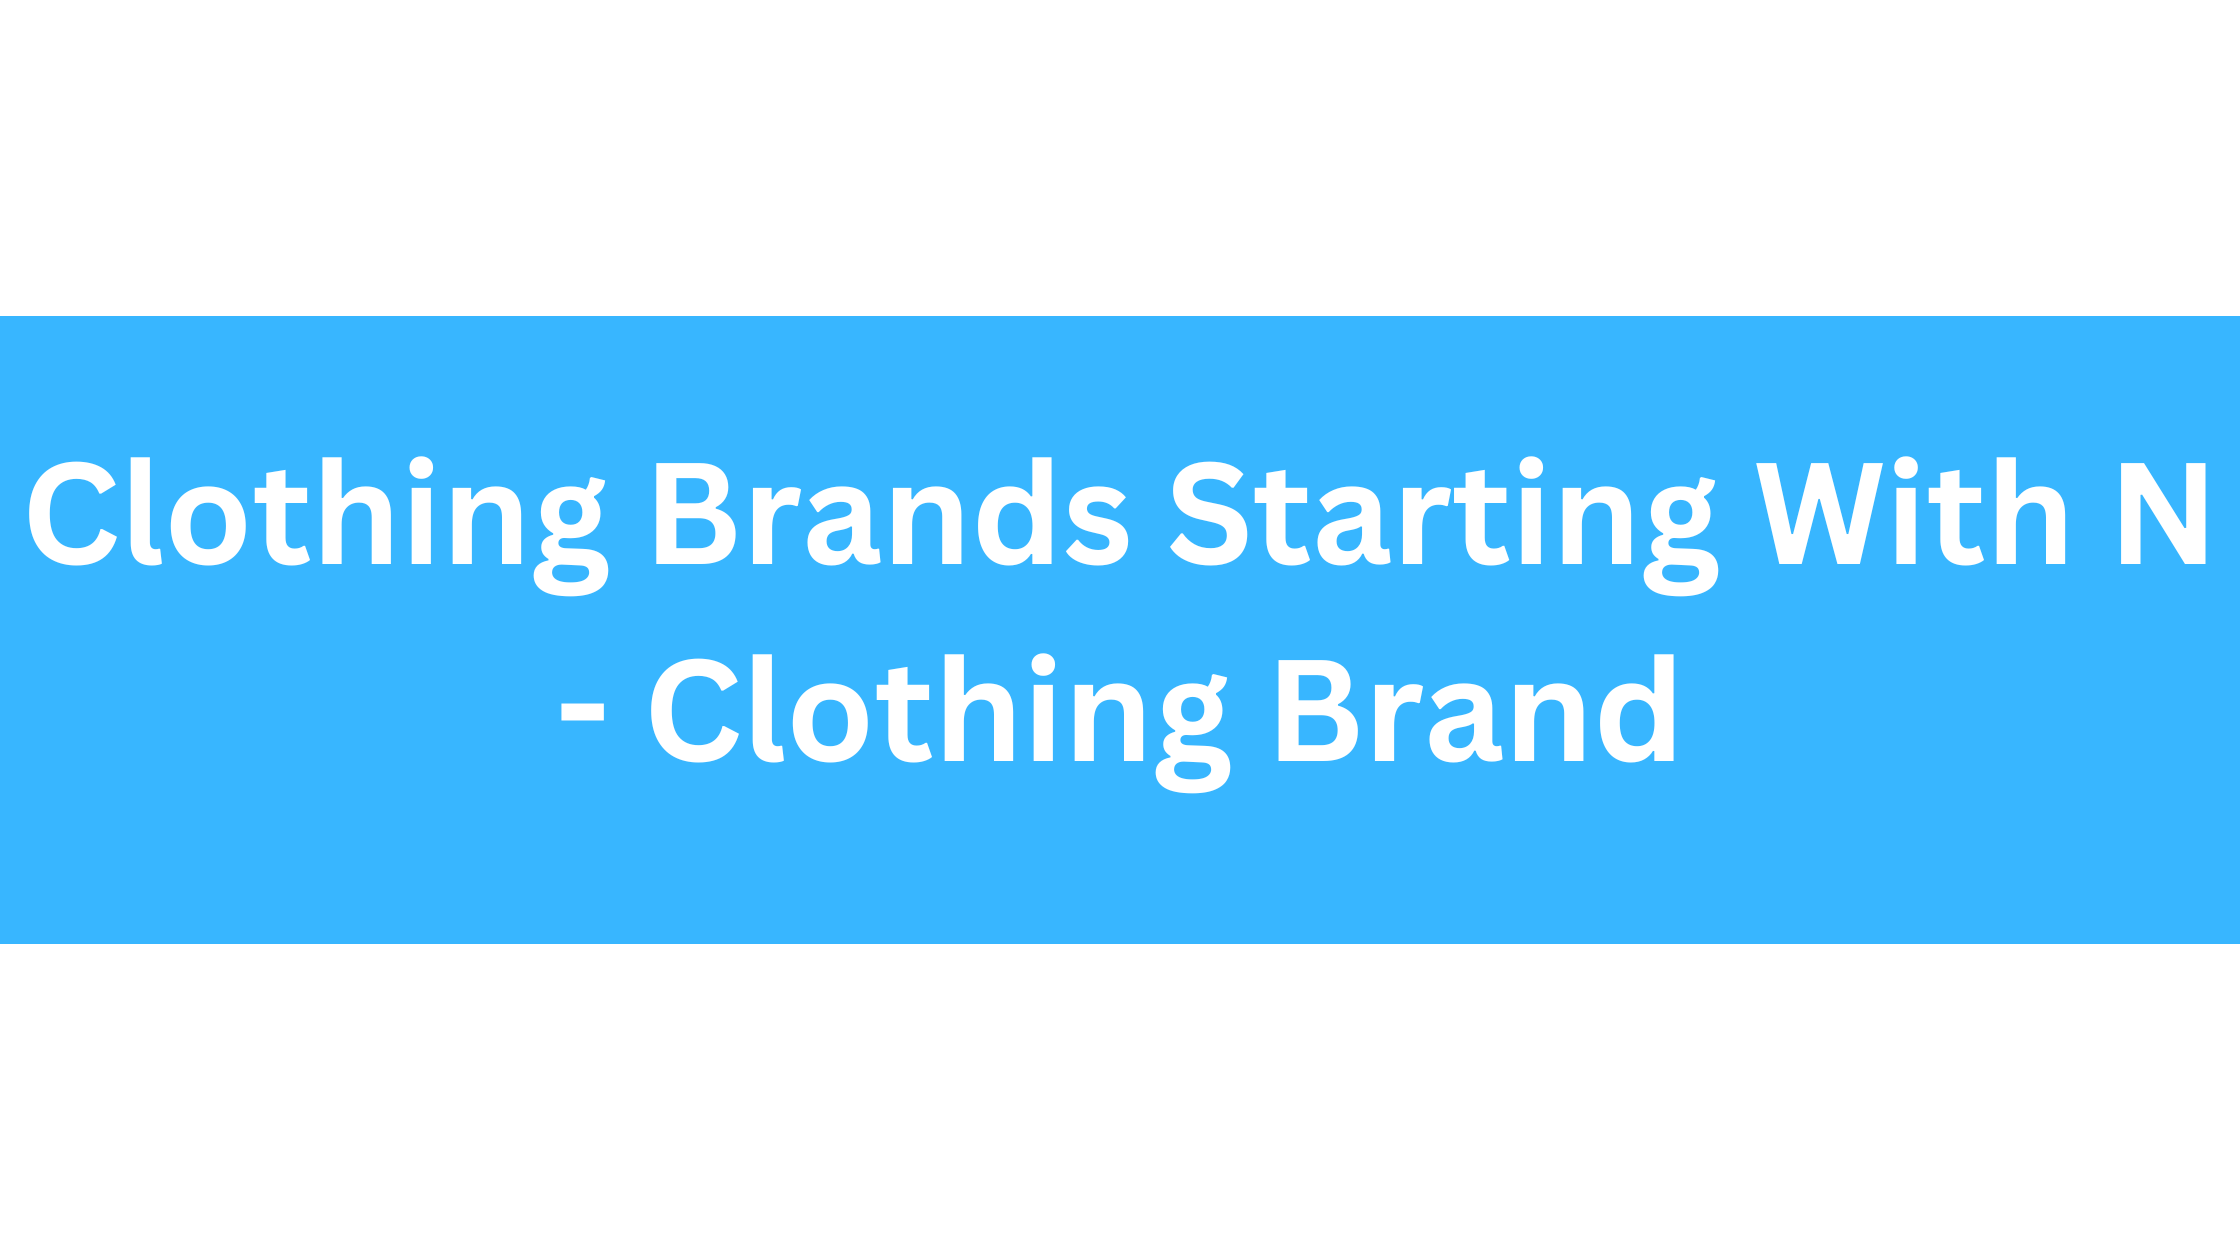 Clothing Brands Starting With N